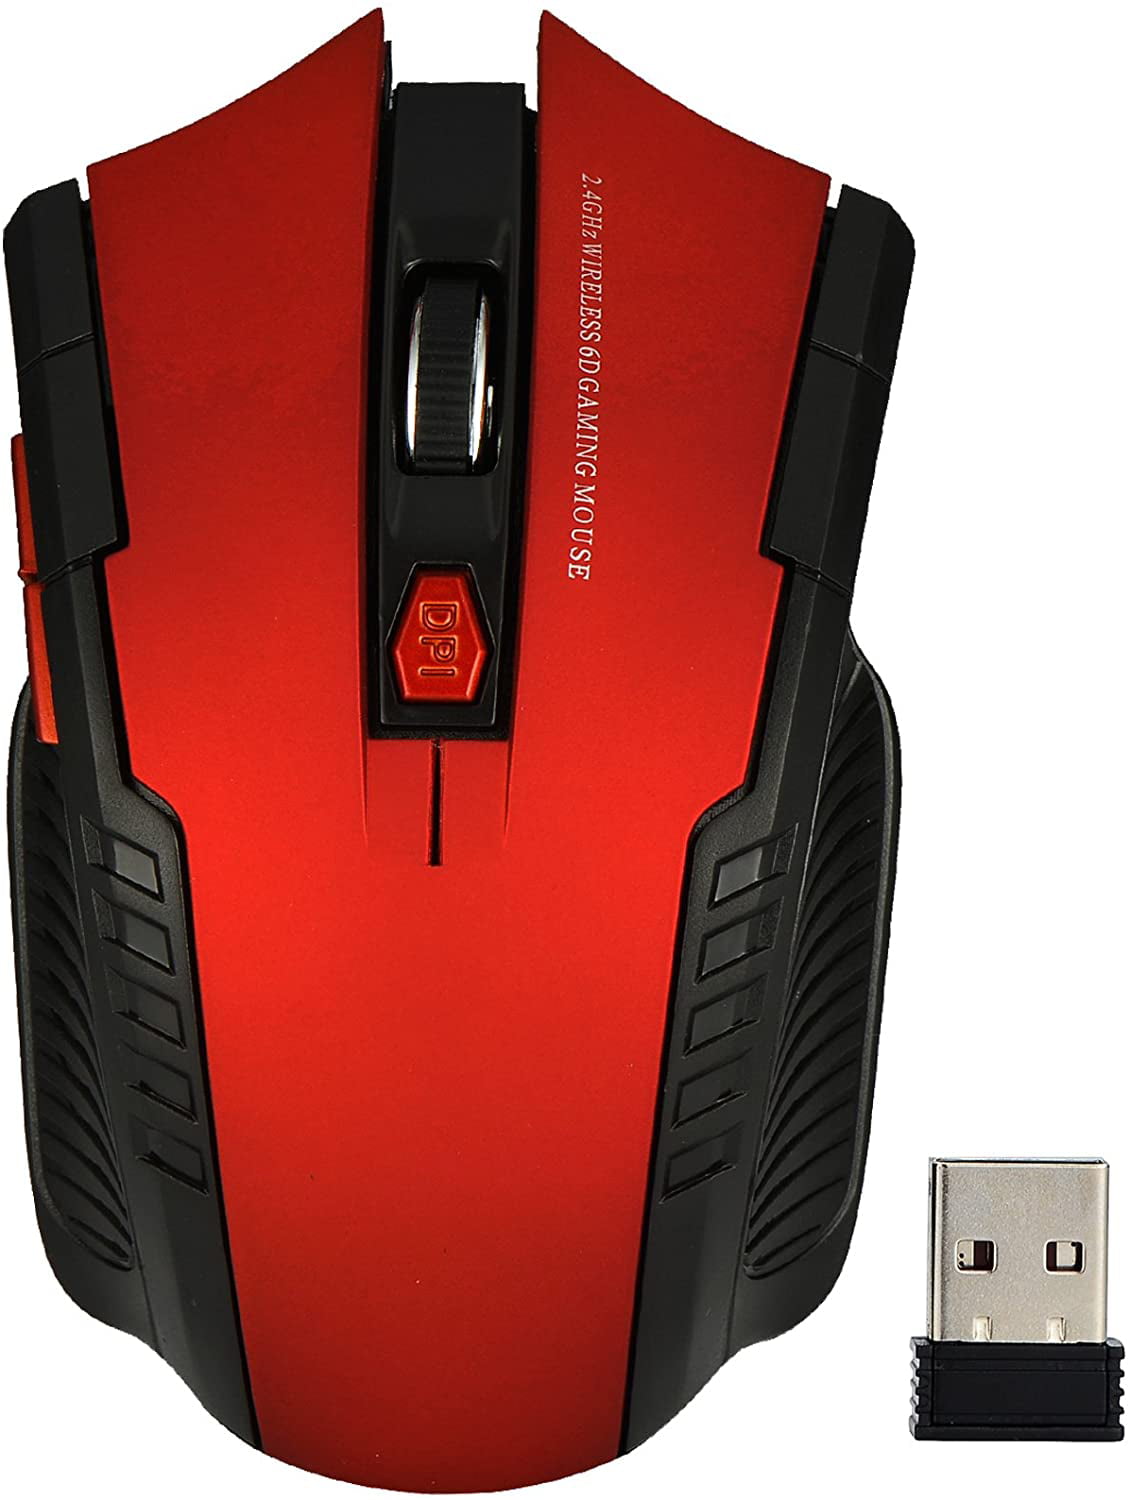 AULA F805 Wired Gaming Mouse with 2 Side Buttons Programmable 